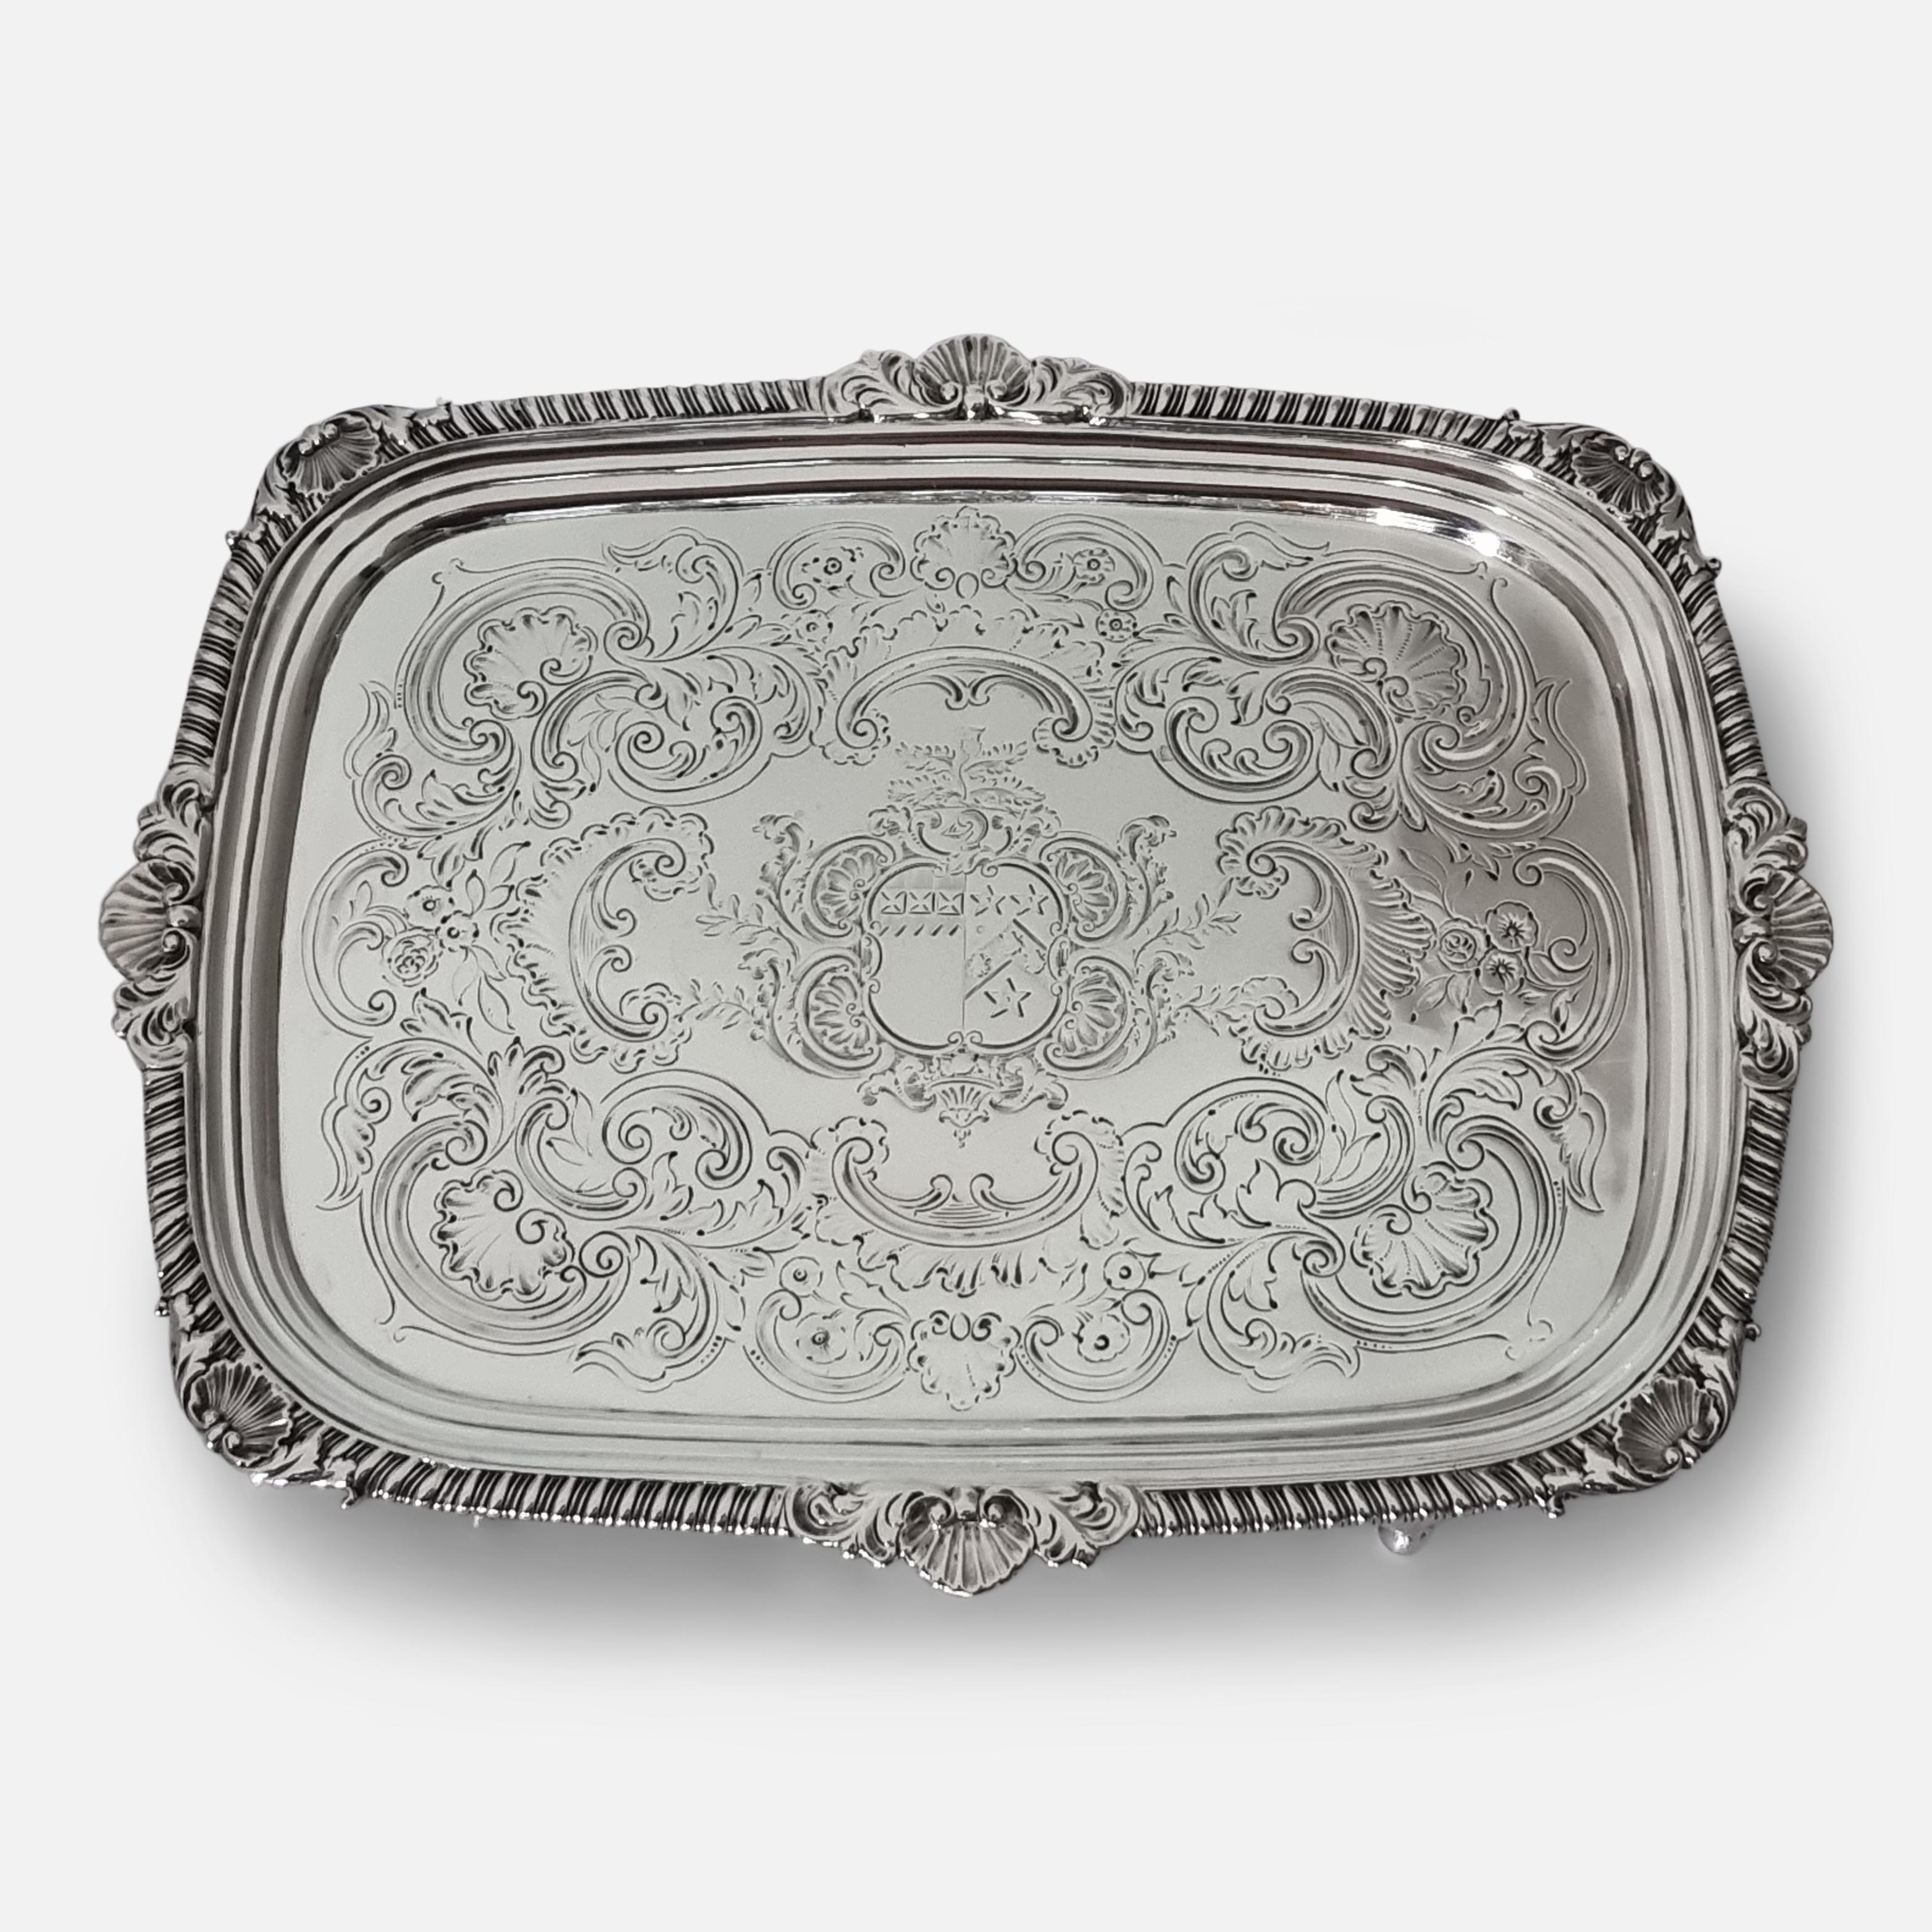 A George III sterling silver salver. The salver is of oblong form, with a gadrooned and shell border, engraved with C-scrolls, foliate swags, an armorial crest, on four ball feet.

The hallmarks are located to the reverse with the makers mark of